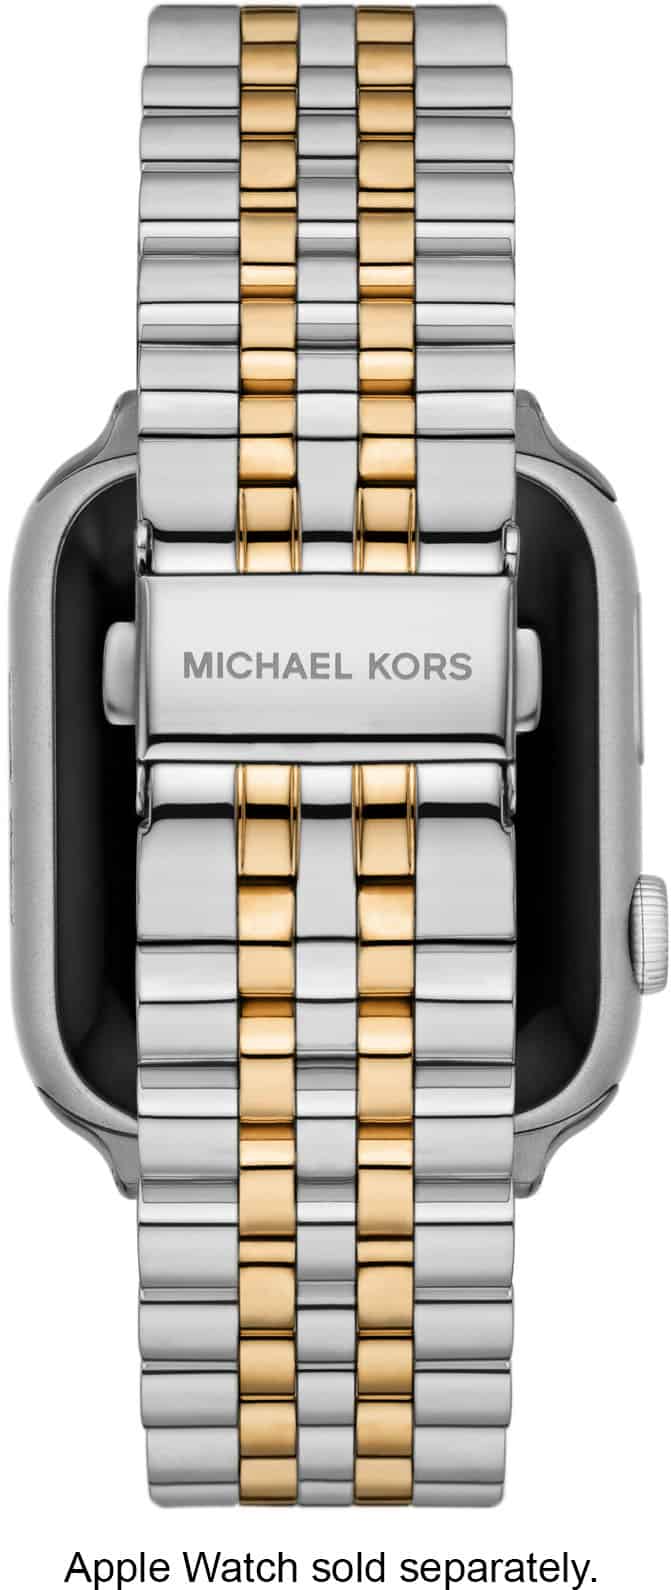 Gold-and Silver stainless steel luxury Apple Watch case by Michael Kors